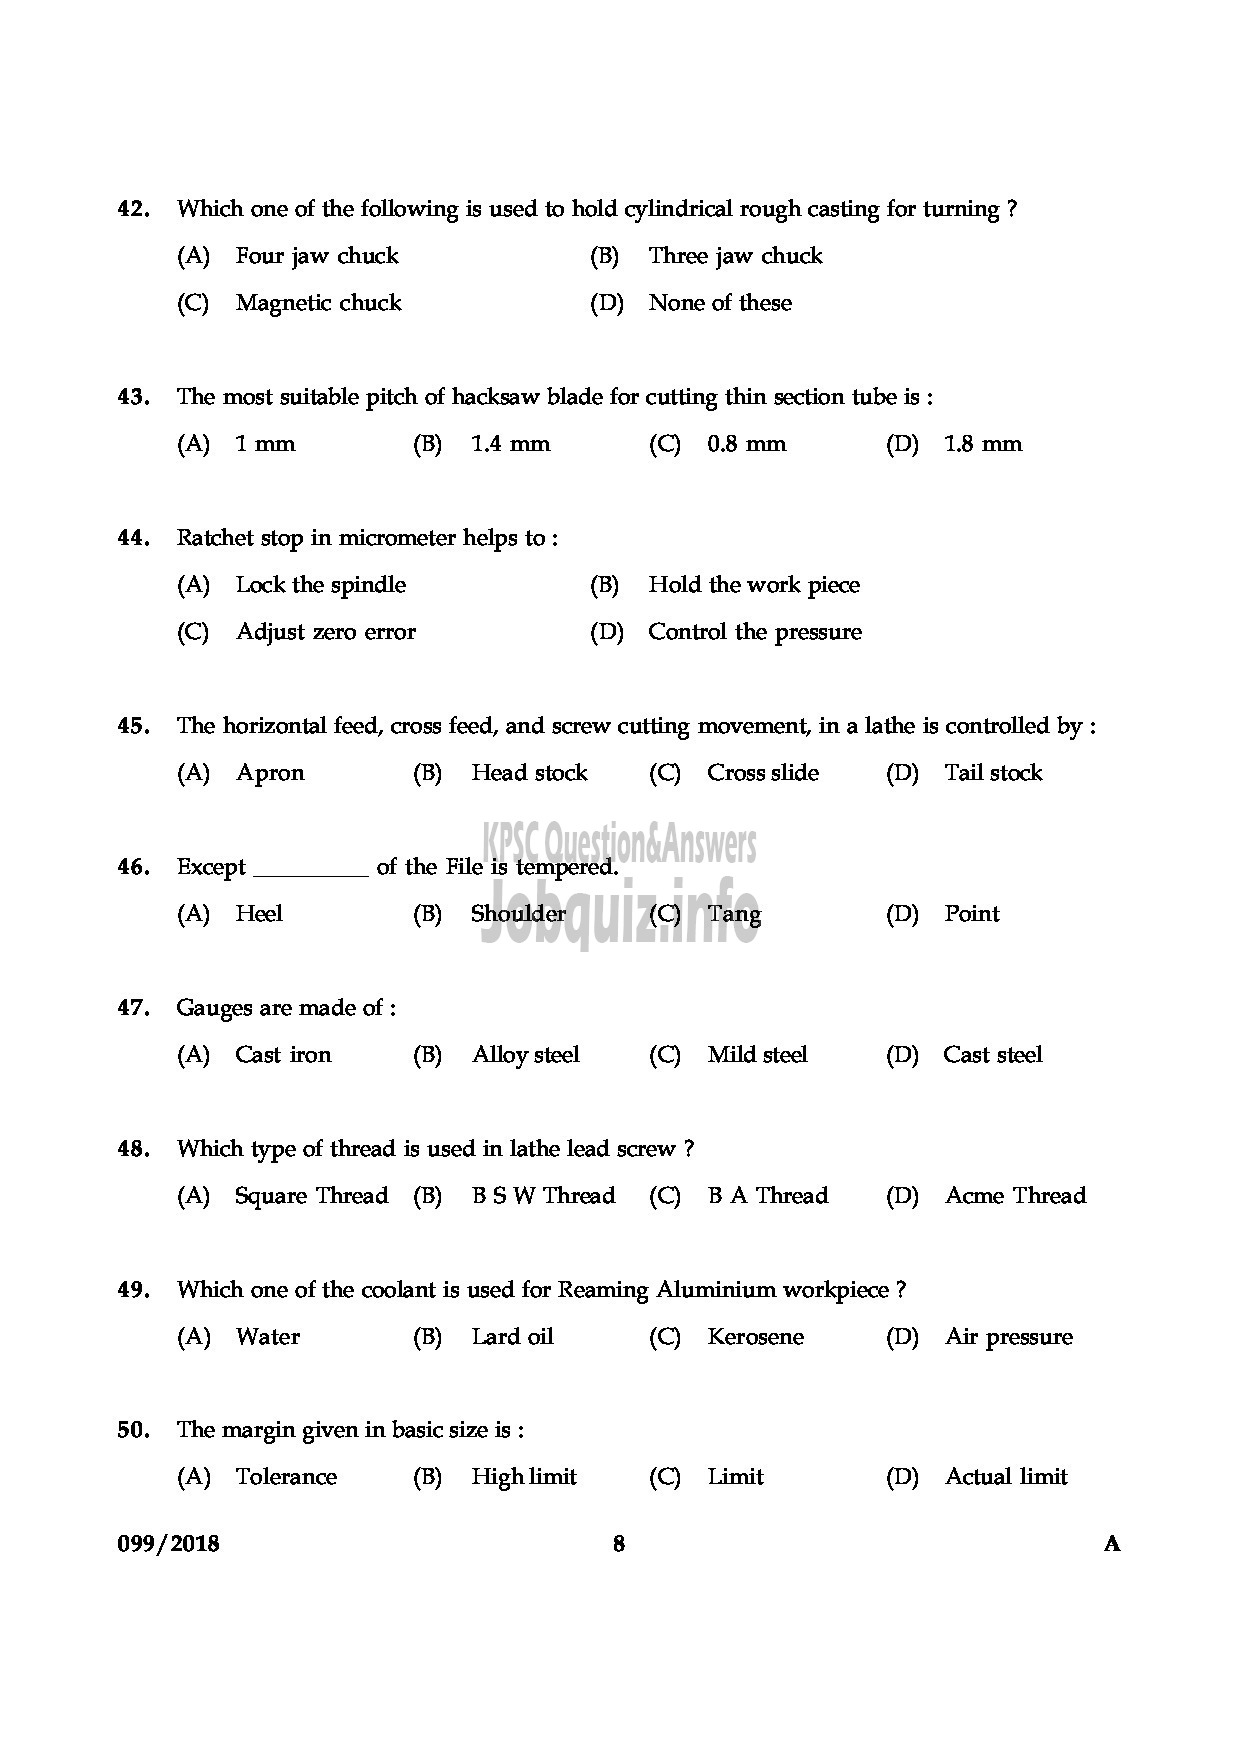 Kerala PSC Question Paper - JUNIOR INSTRUCTOR FITTER INDUSTRIAL TRAINING ENGLISH -8